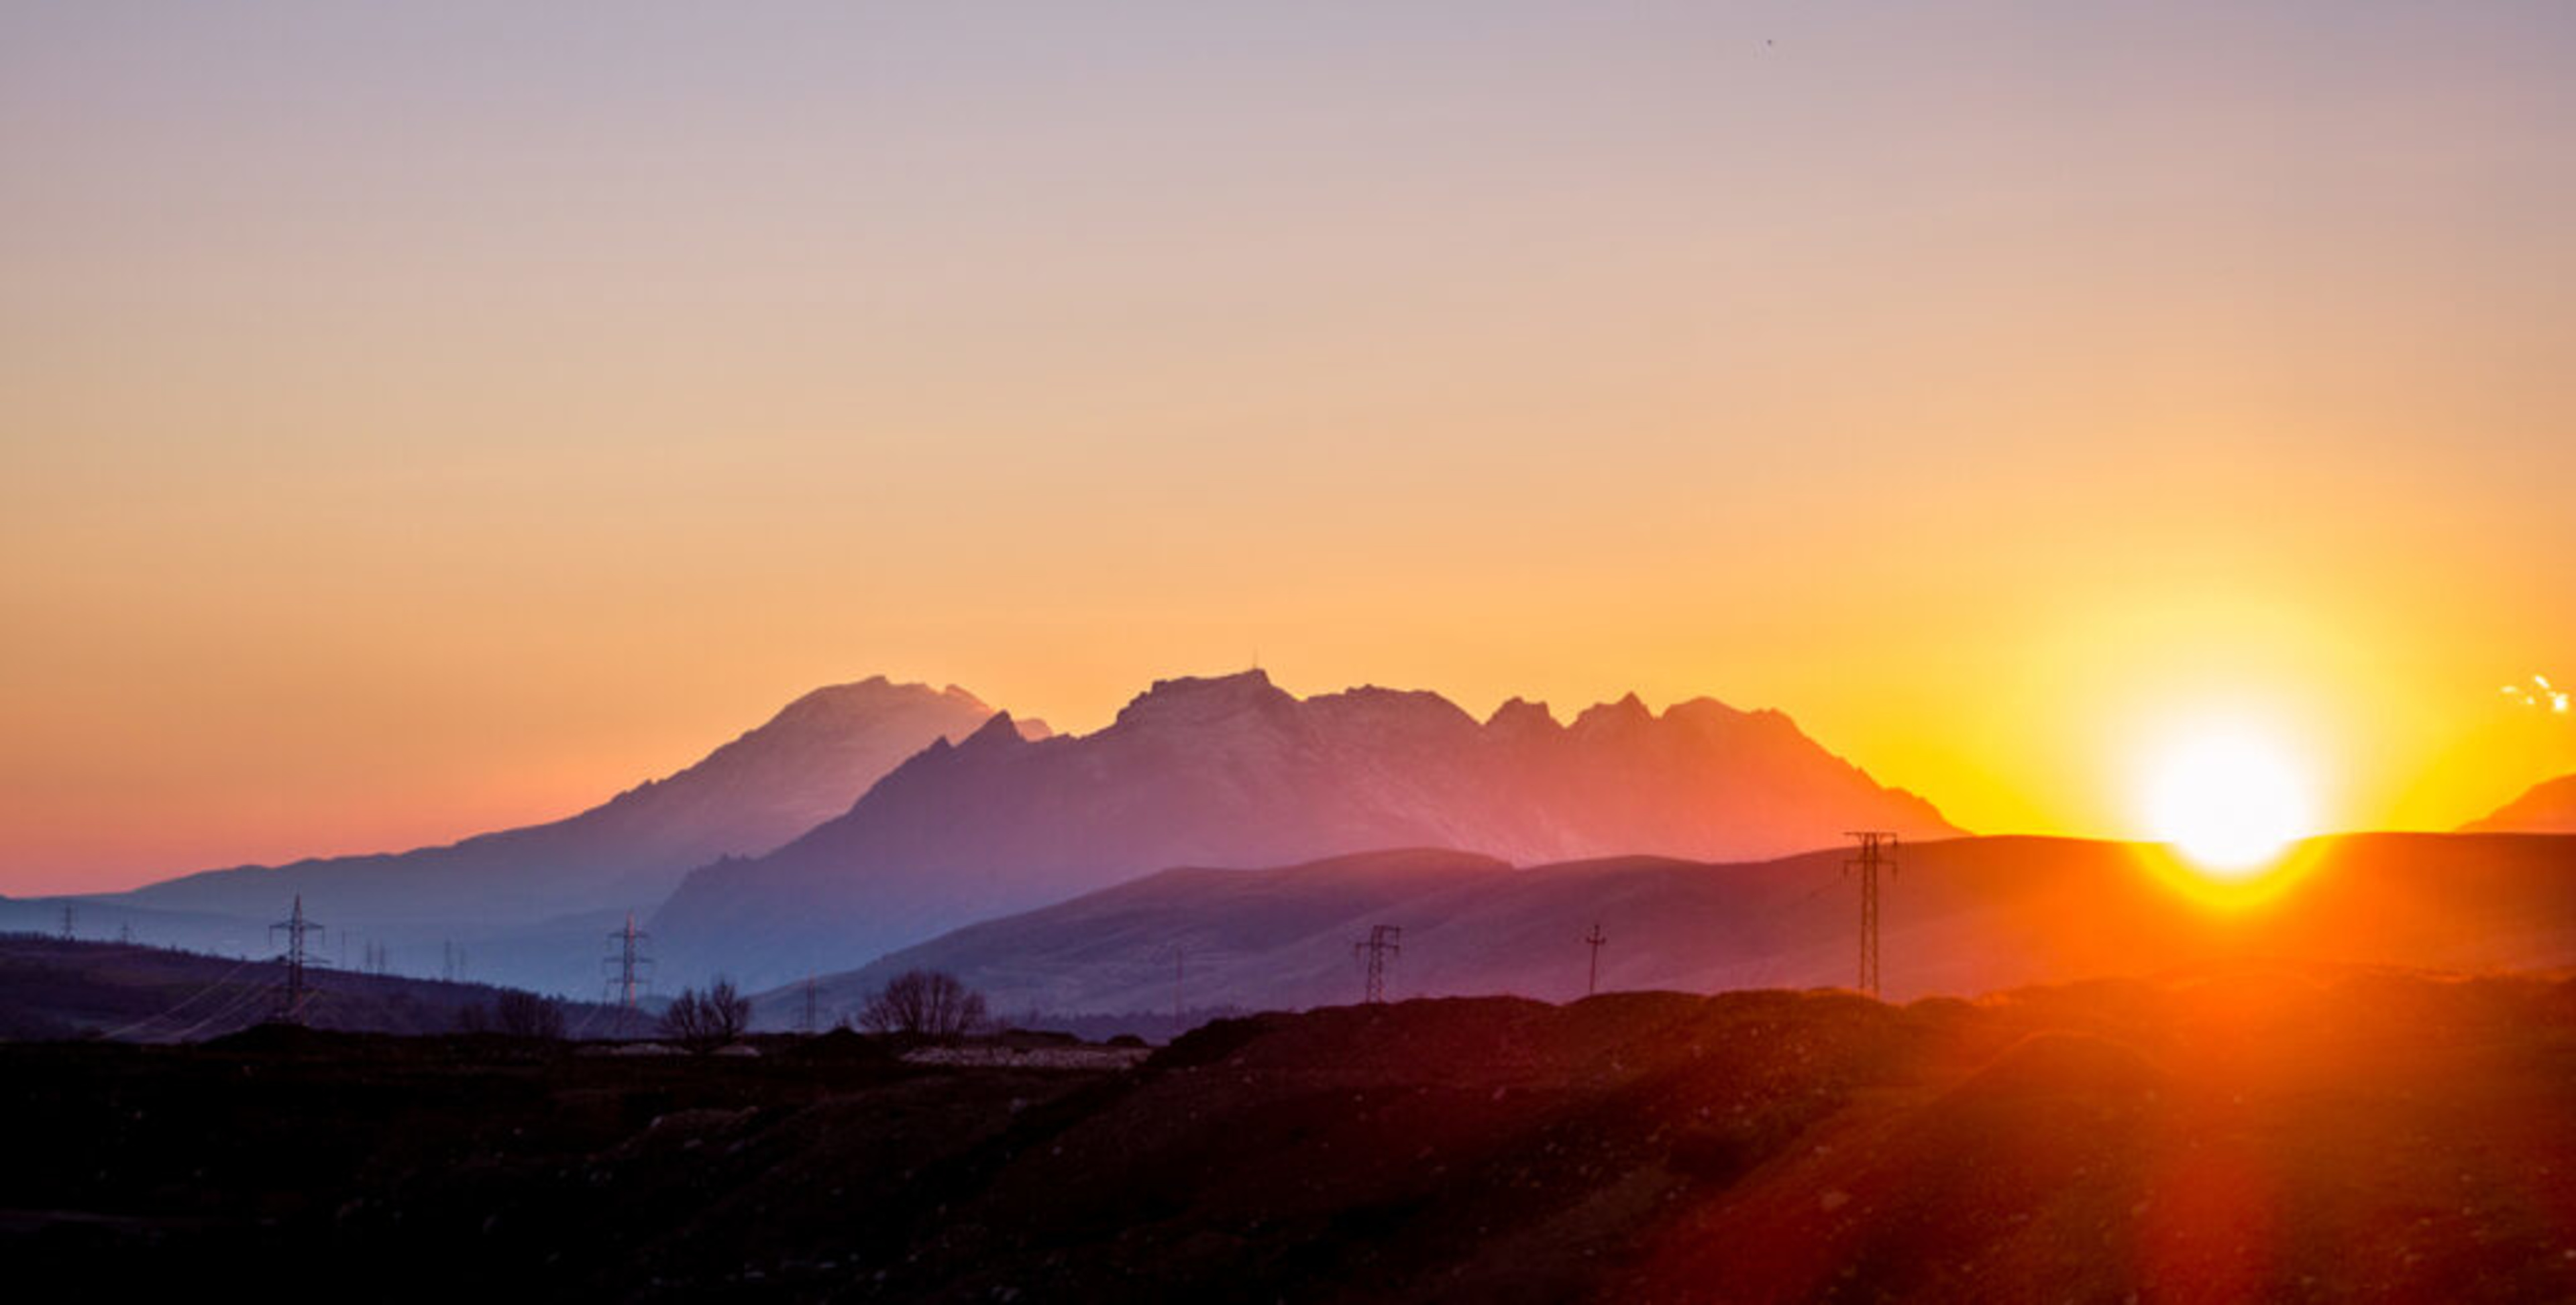 Sunset over mountain range, symbolizing a patience-filled approach of implementing an optimistic UI in software development.